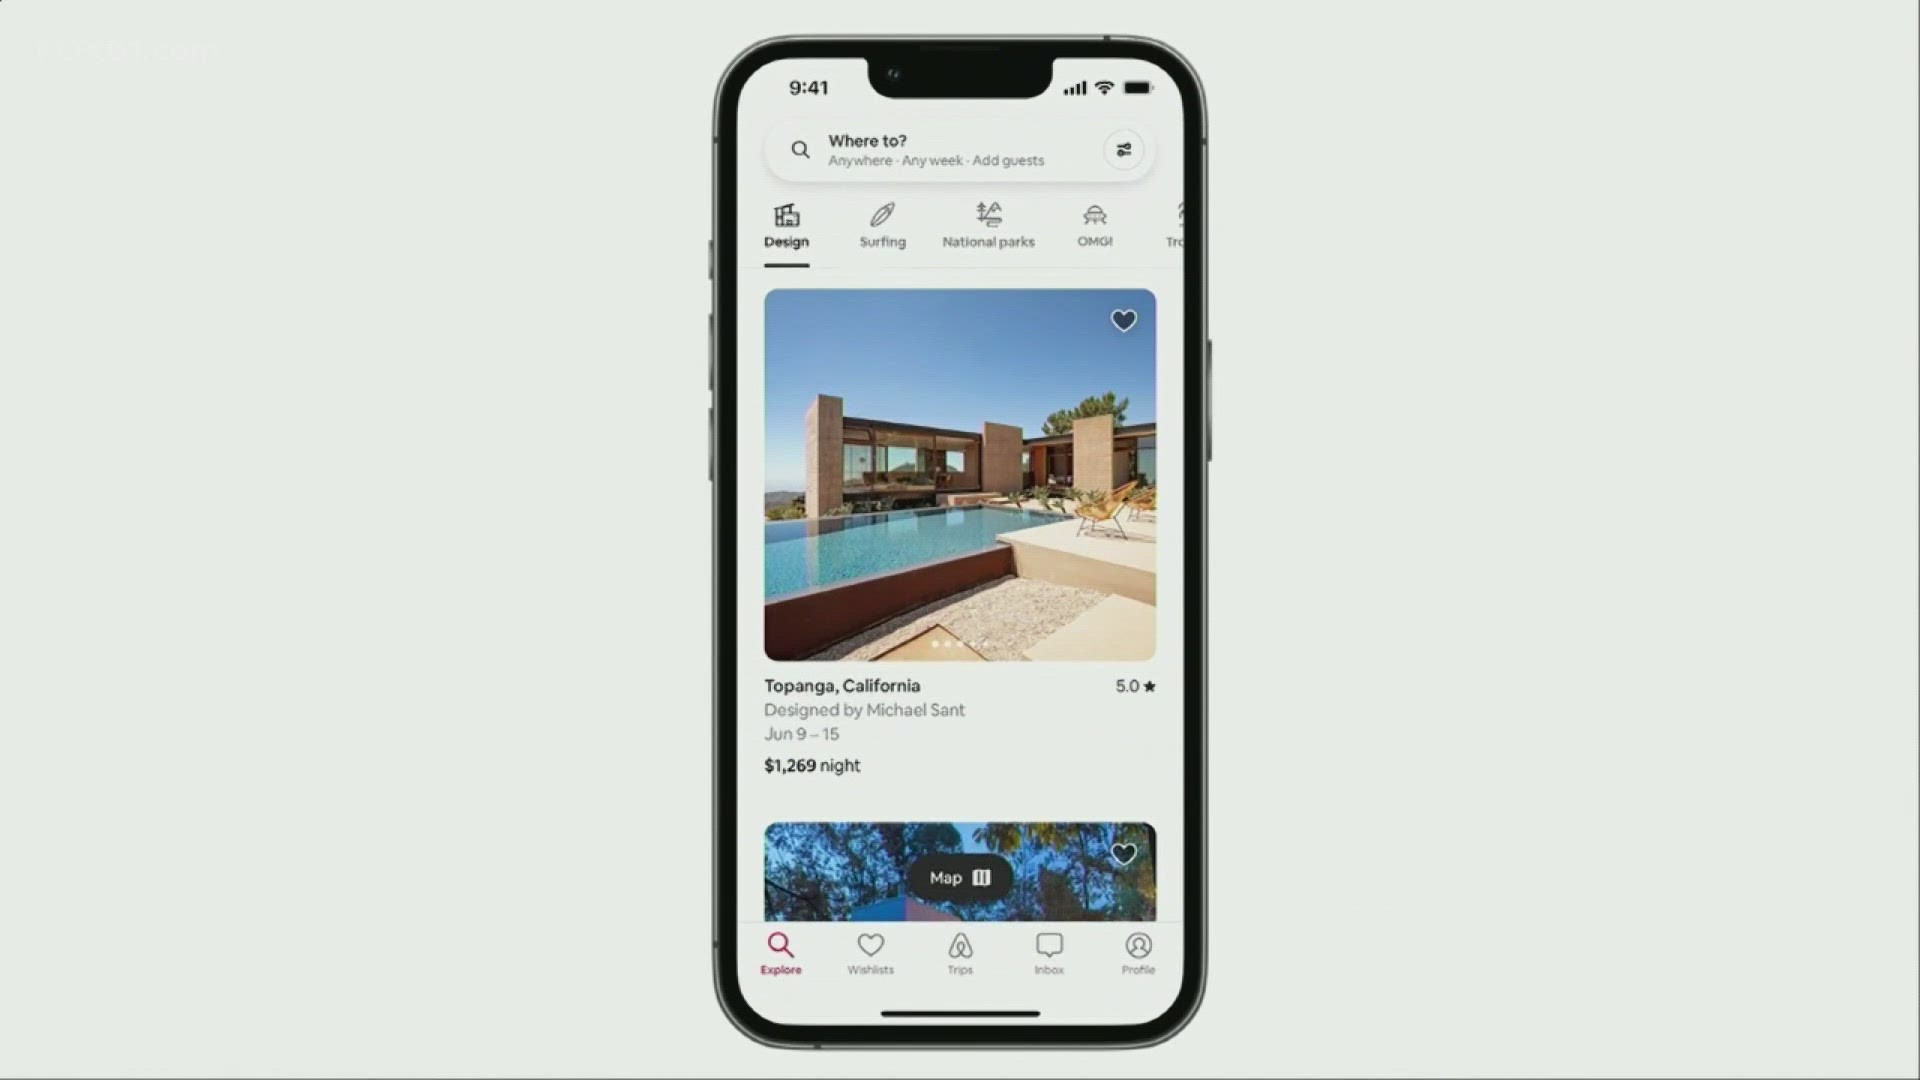 Airbnb had allowed the use of indoor security cameras in common areas, as long as the locations of the cameras were disclosed on the listings page.